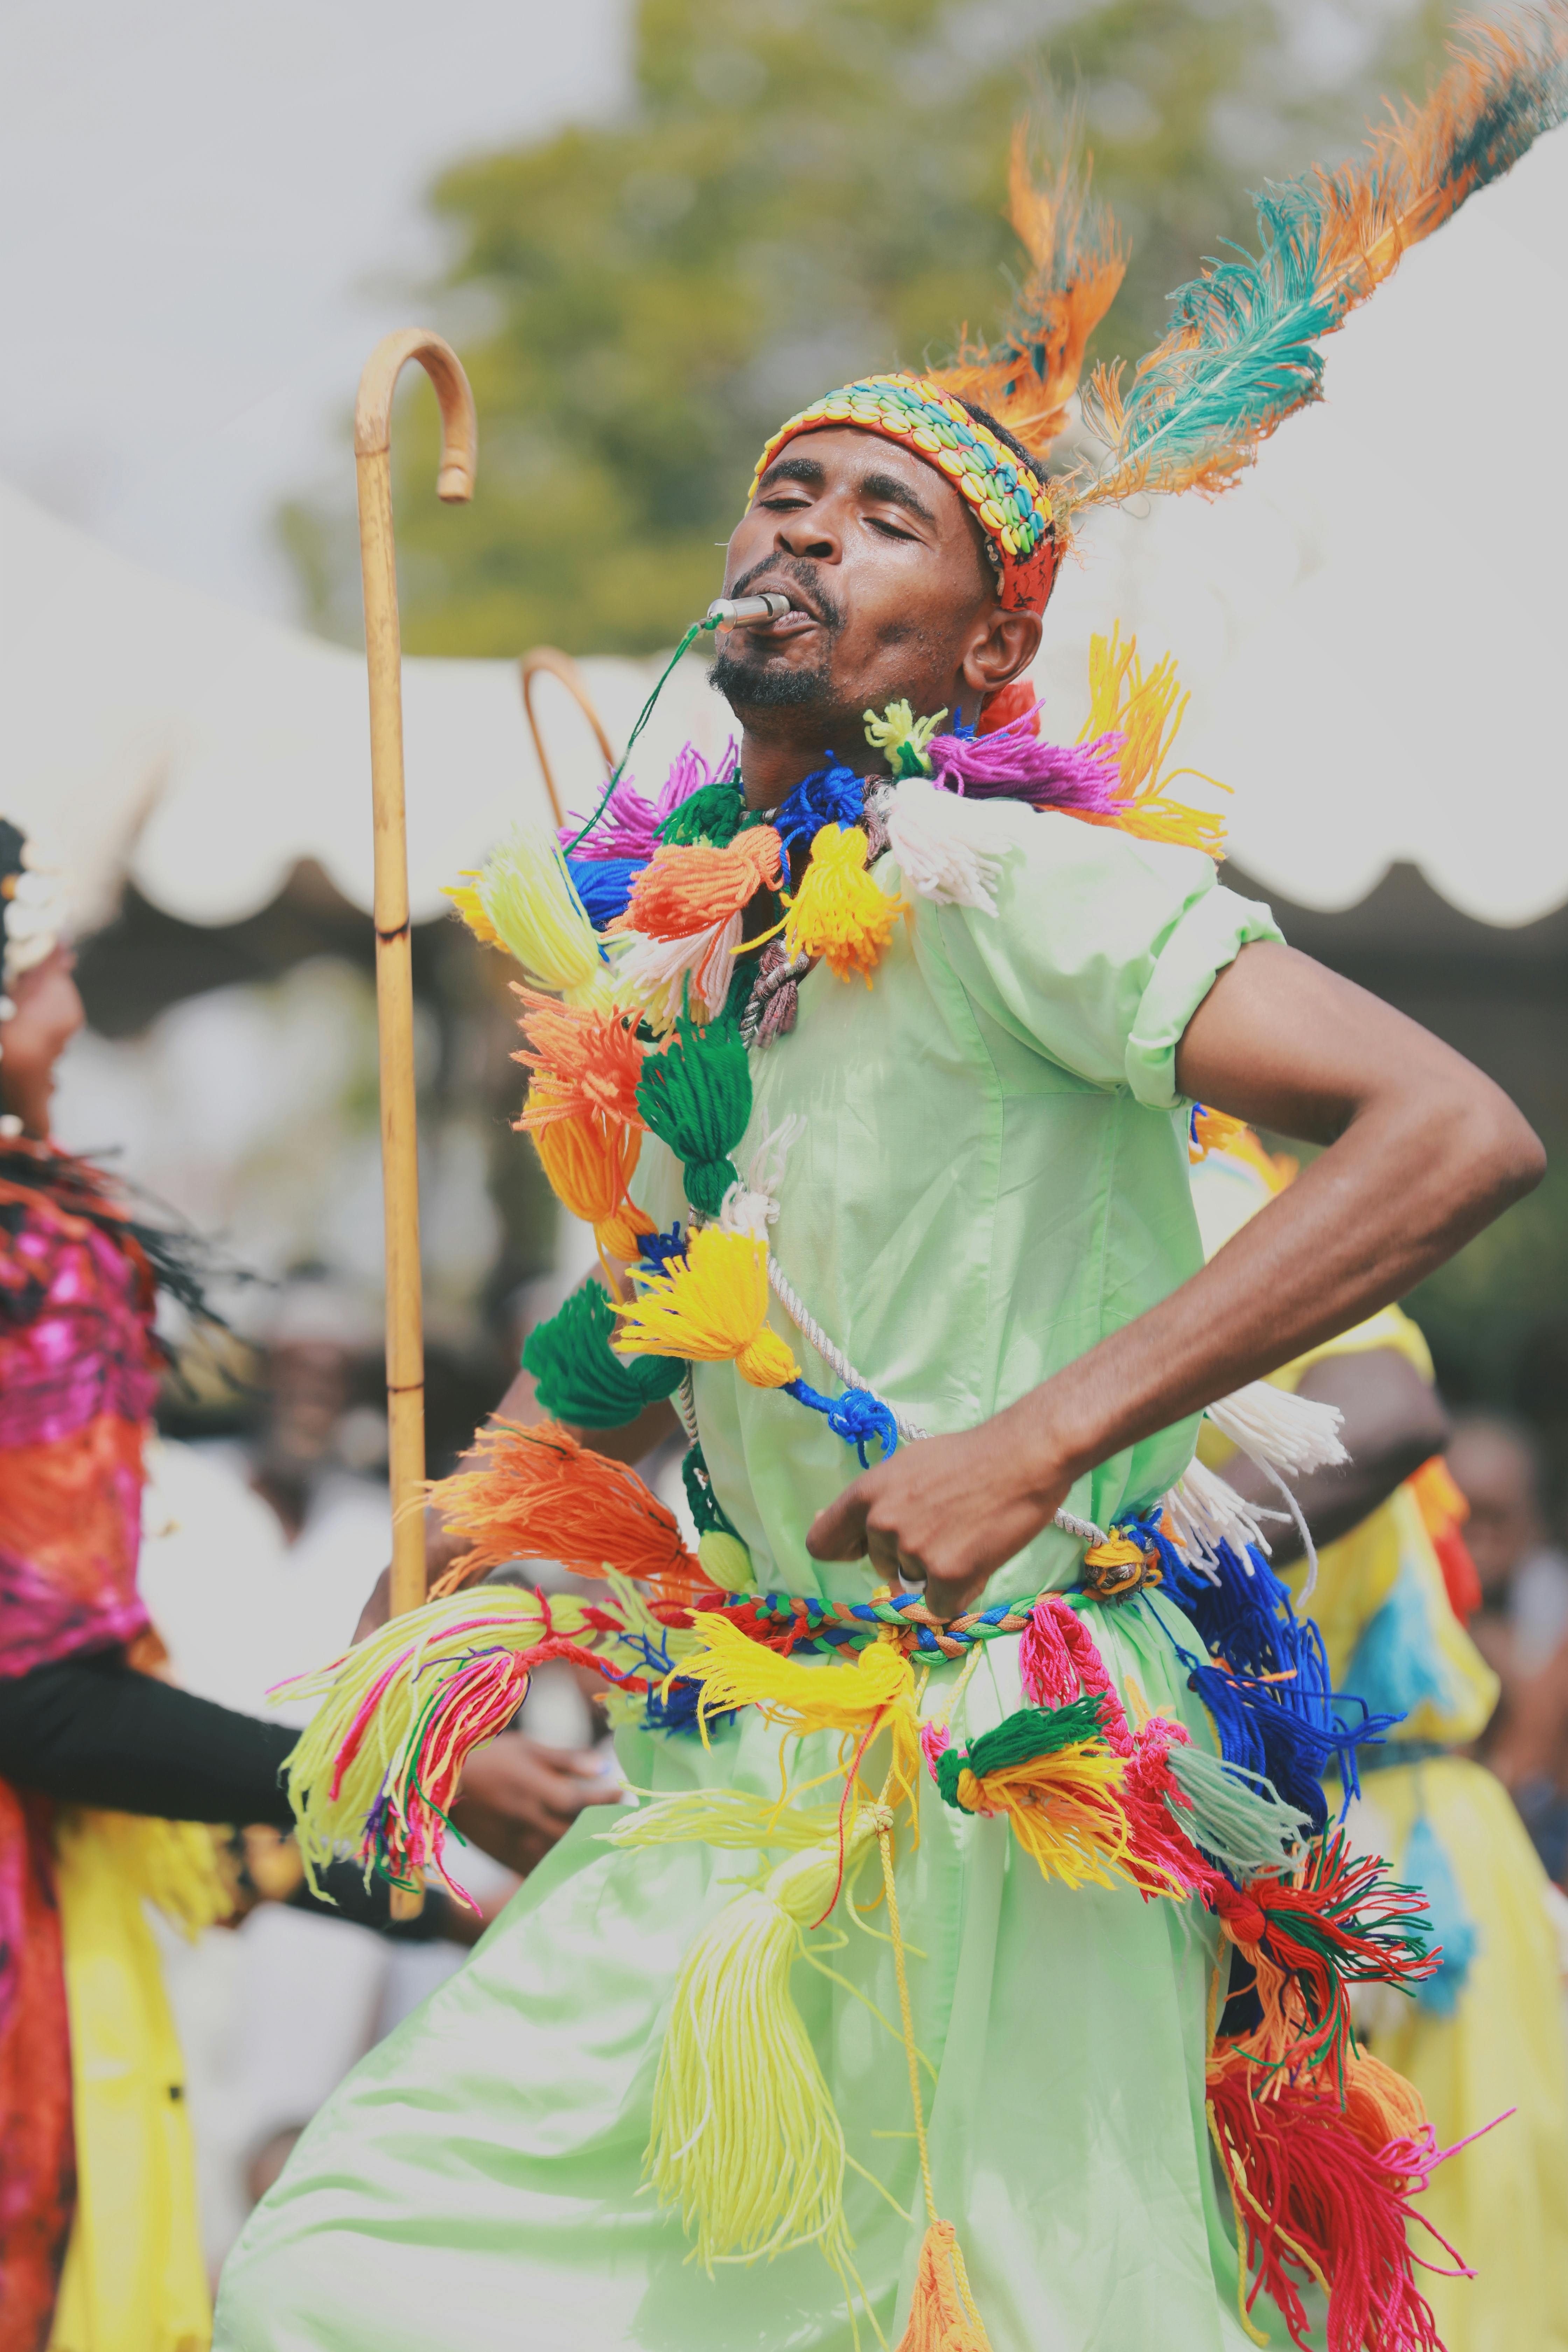 Festival Fever: How to Experience Local Cultural Festivals Authentically